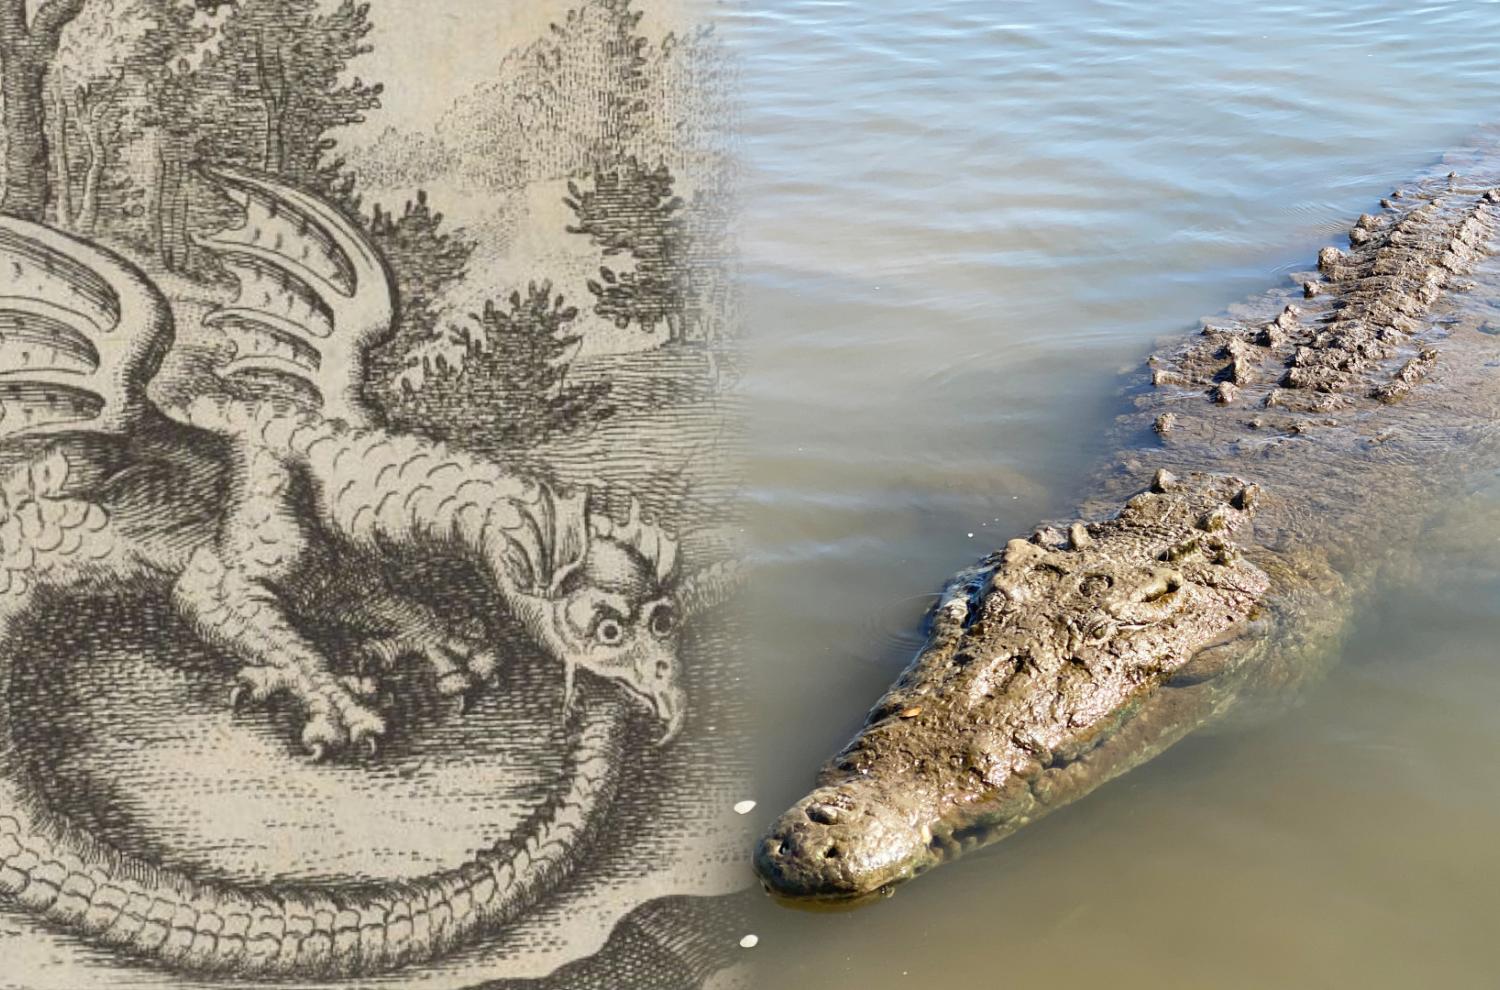 Left, an image of a dragon from an alchemical text titled “Musaeum hermeticum, reformatum et amplificatum” in The National Library of Israel. Right, a photo of an American crocodile in the Tárcoles River in Costa Rica by Bernard Gagnon.